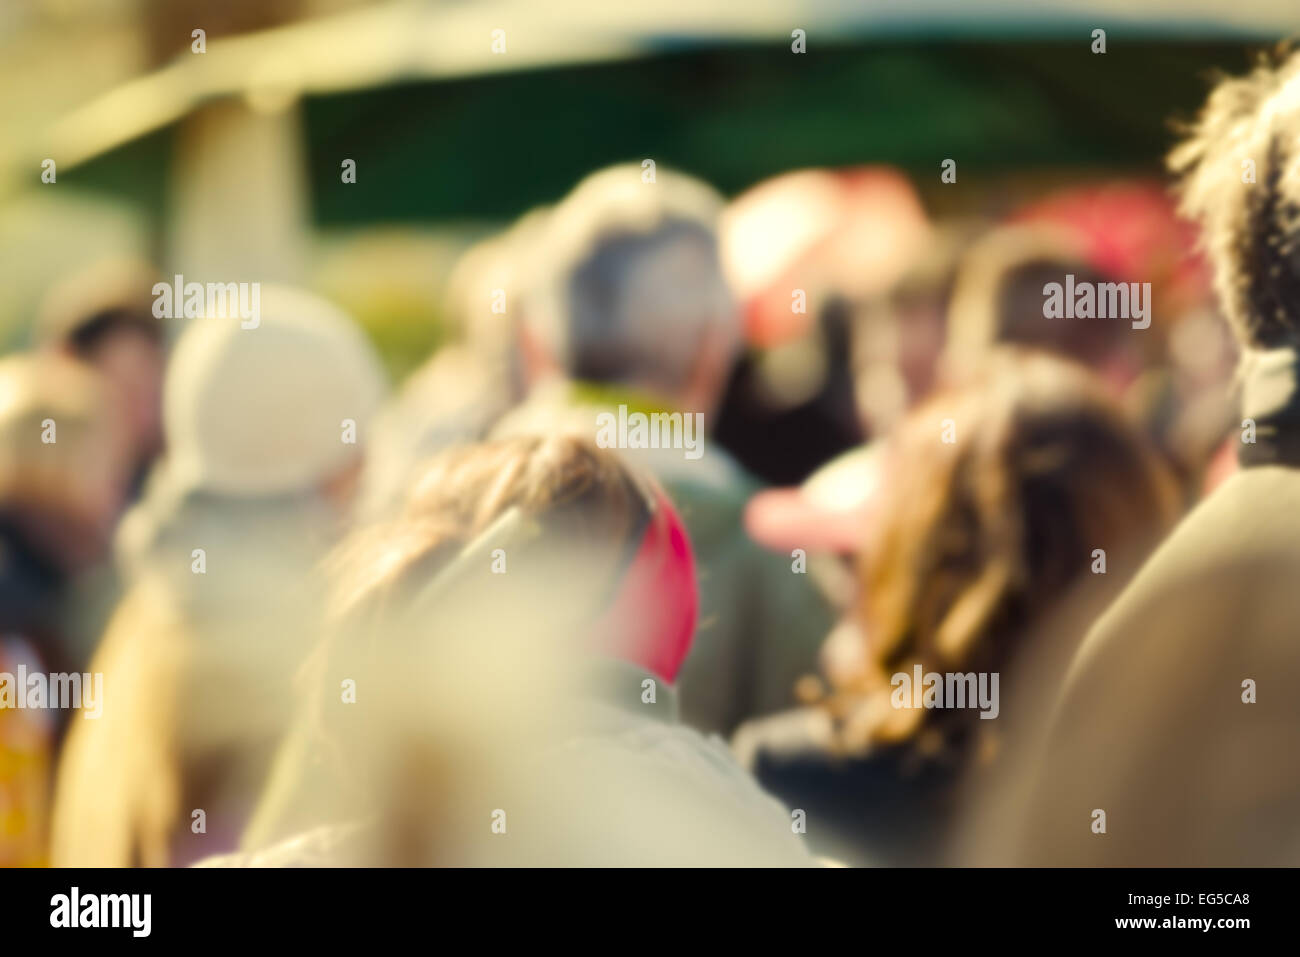 Crowd of People Walking On the Street in Bokeh, unrecognizable group of men and women as blur urban background. Stock Photo